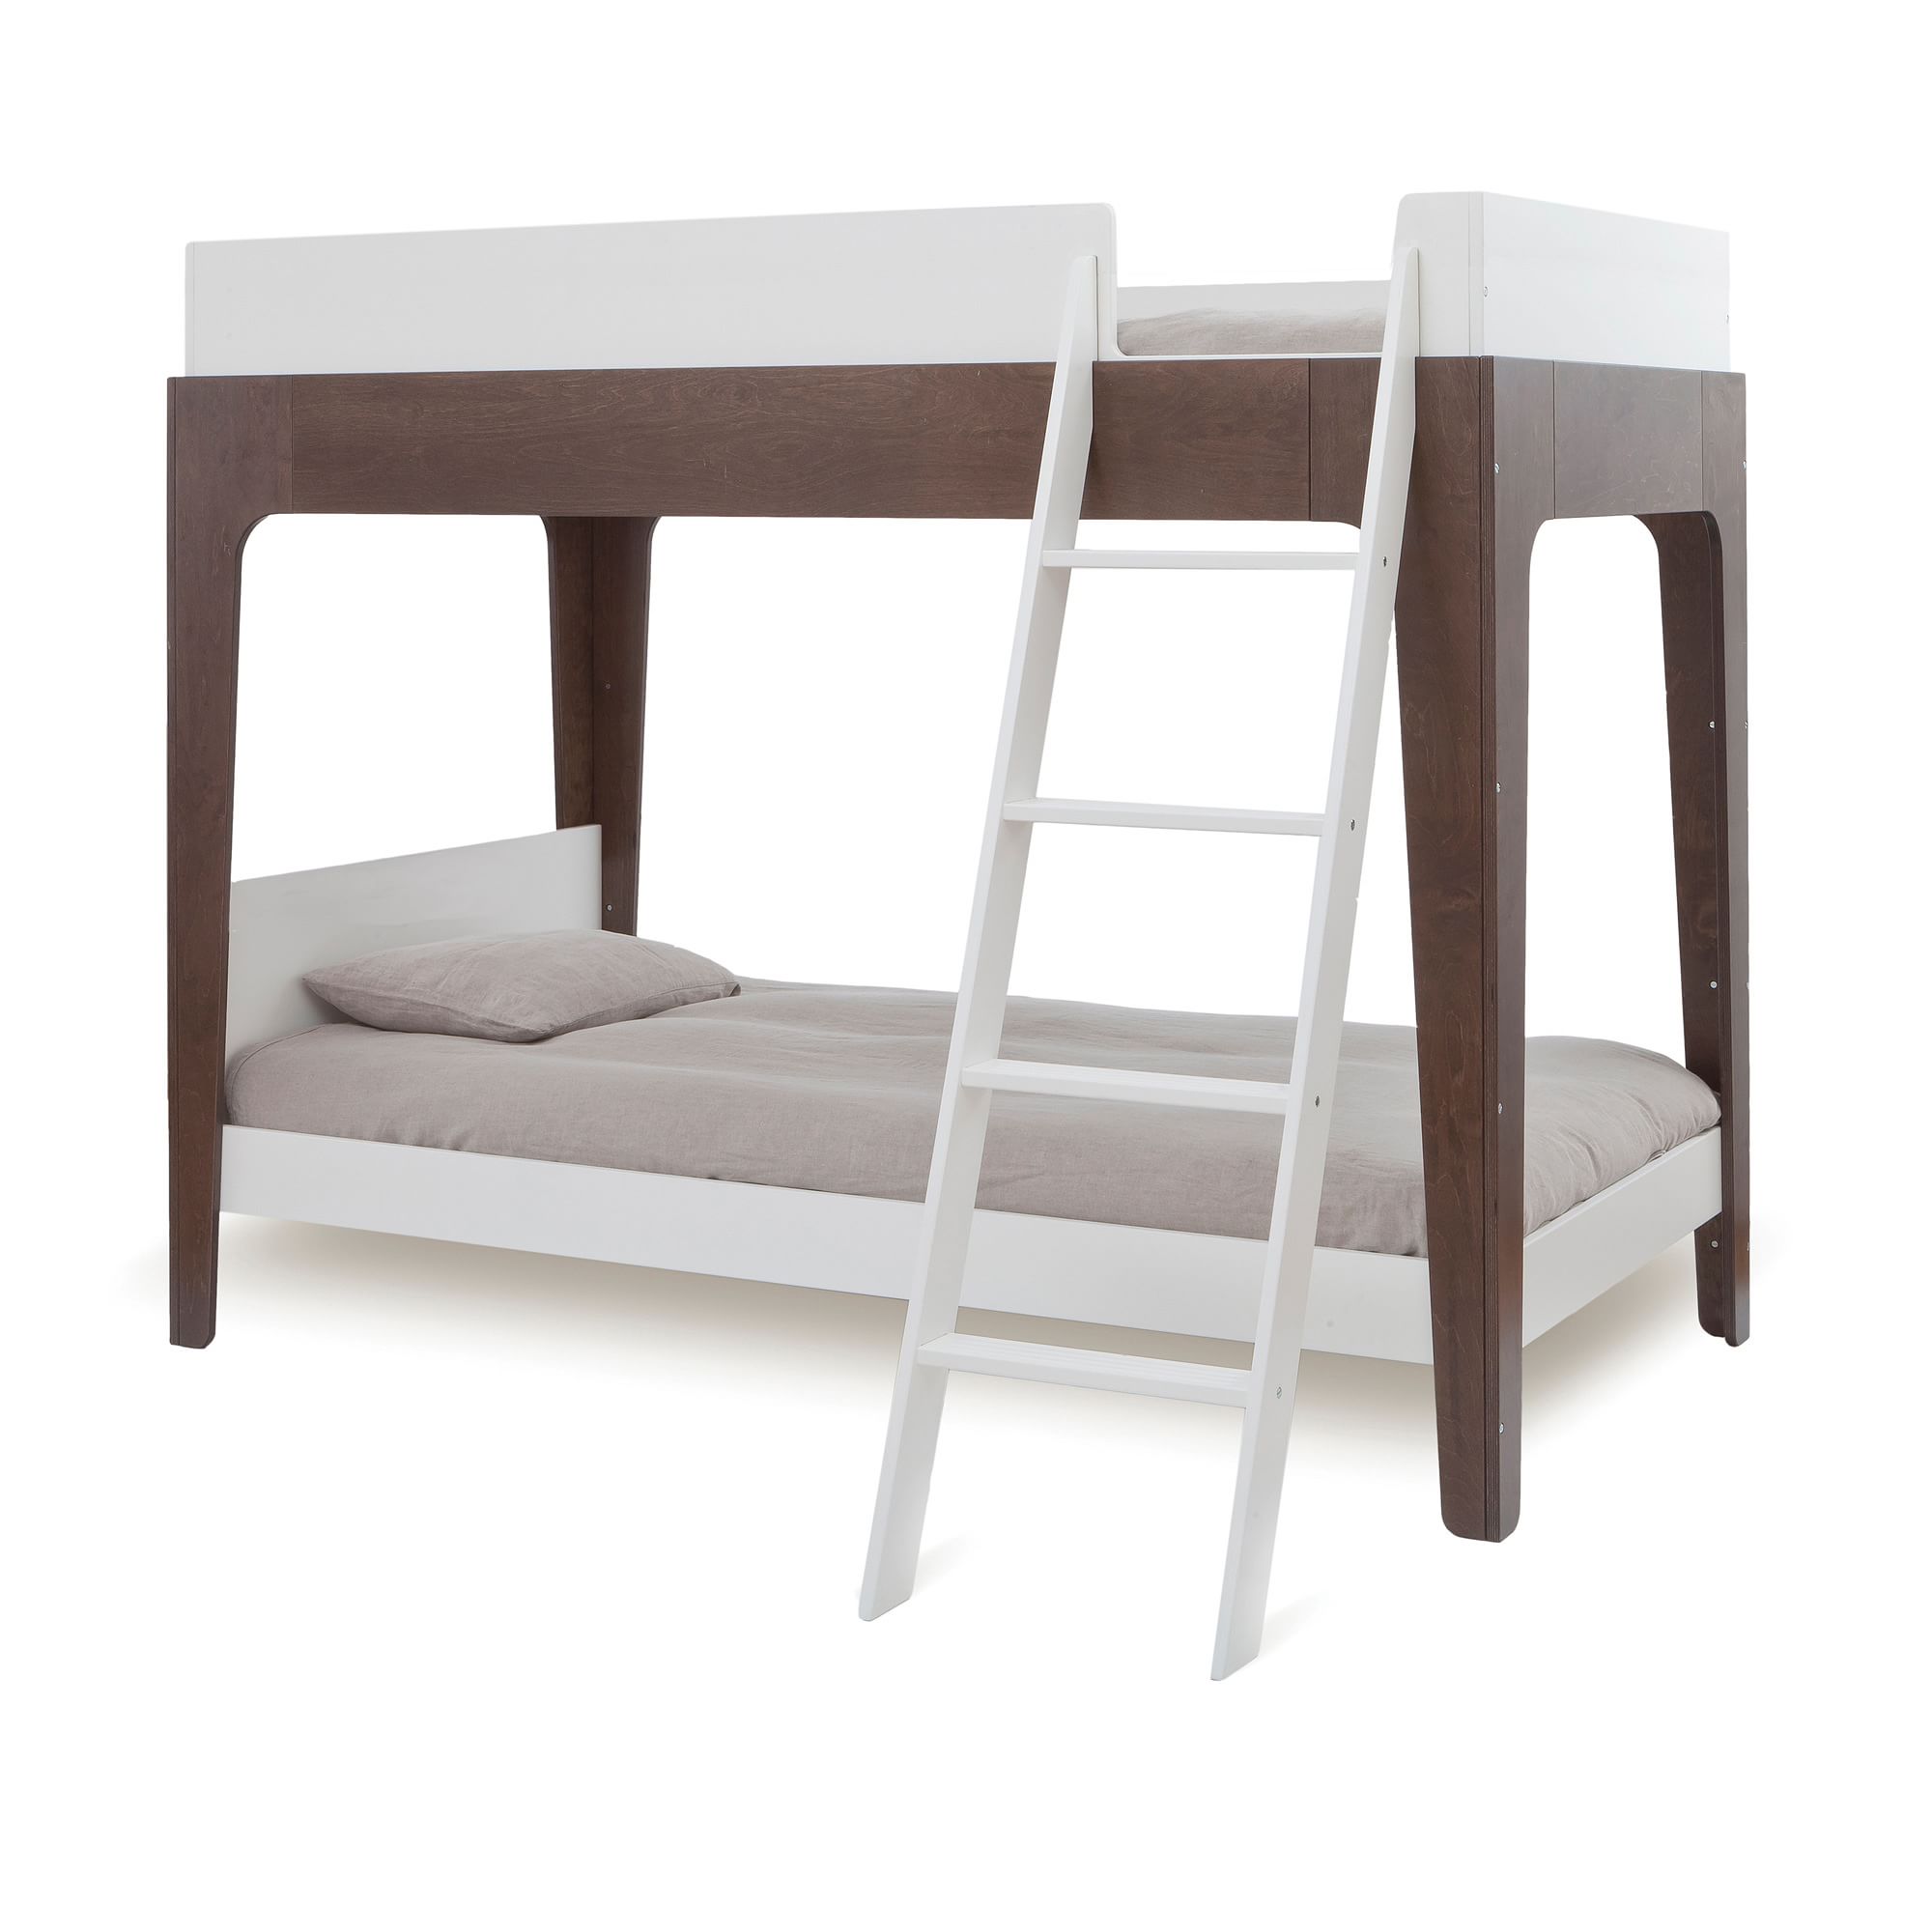 Oeuf Perch Bunk Bed | West Elm